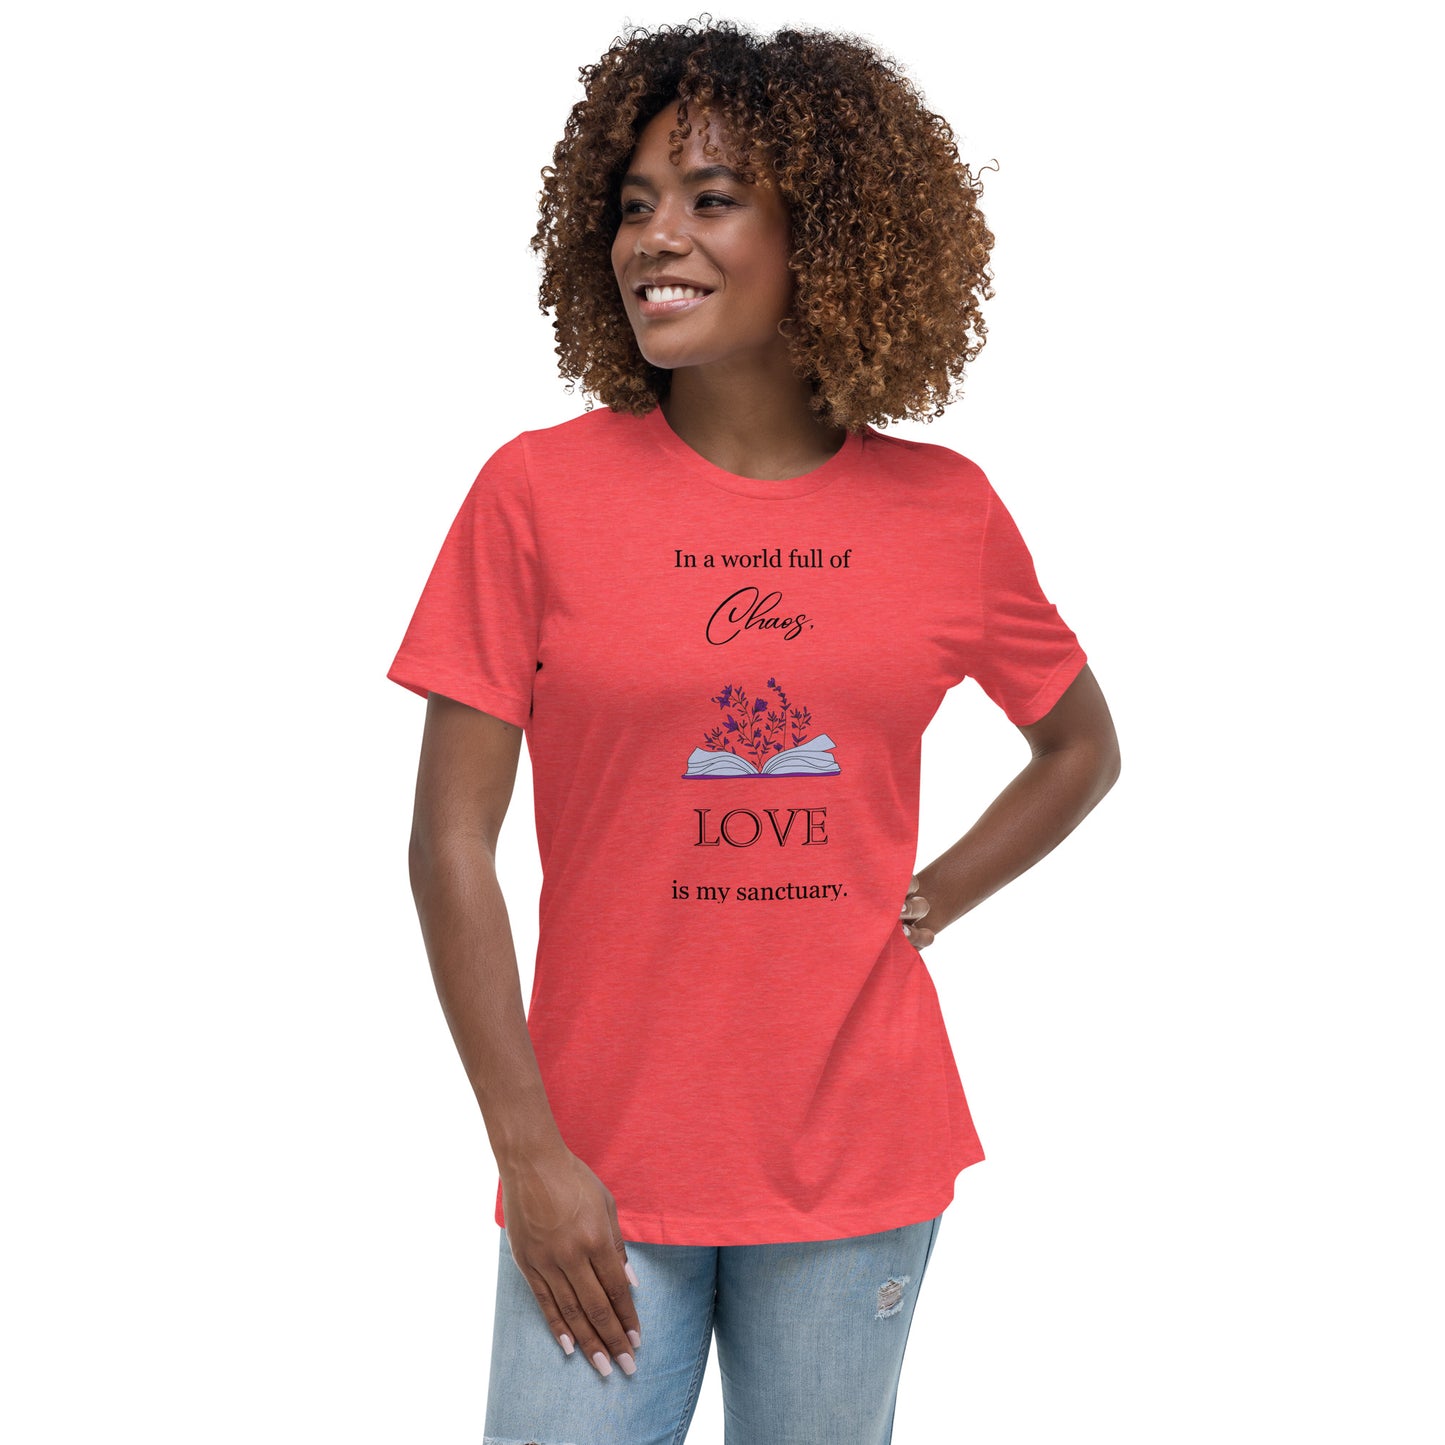 Women's Relaxed T-Shirt, in a world full of chaos, love is my sanctuary